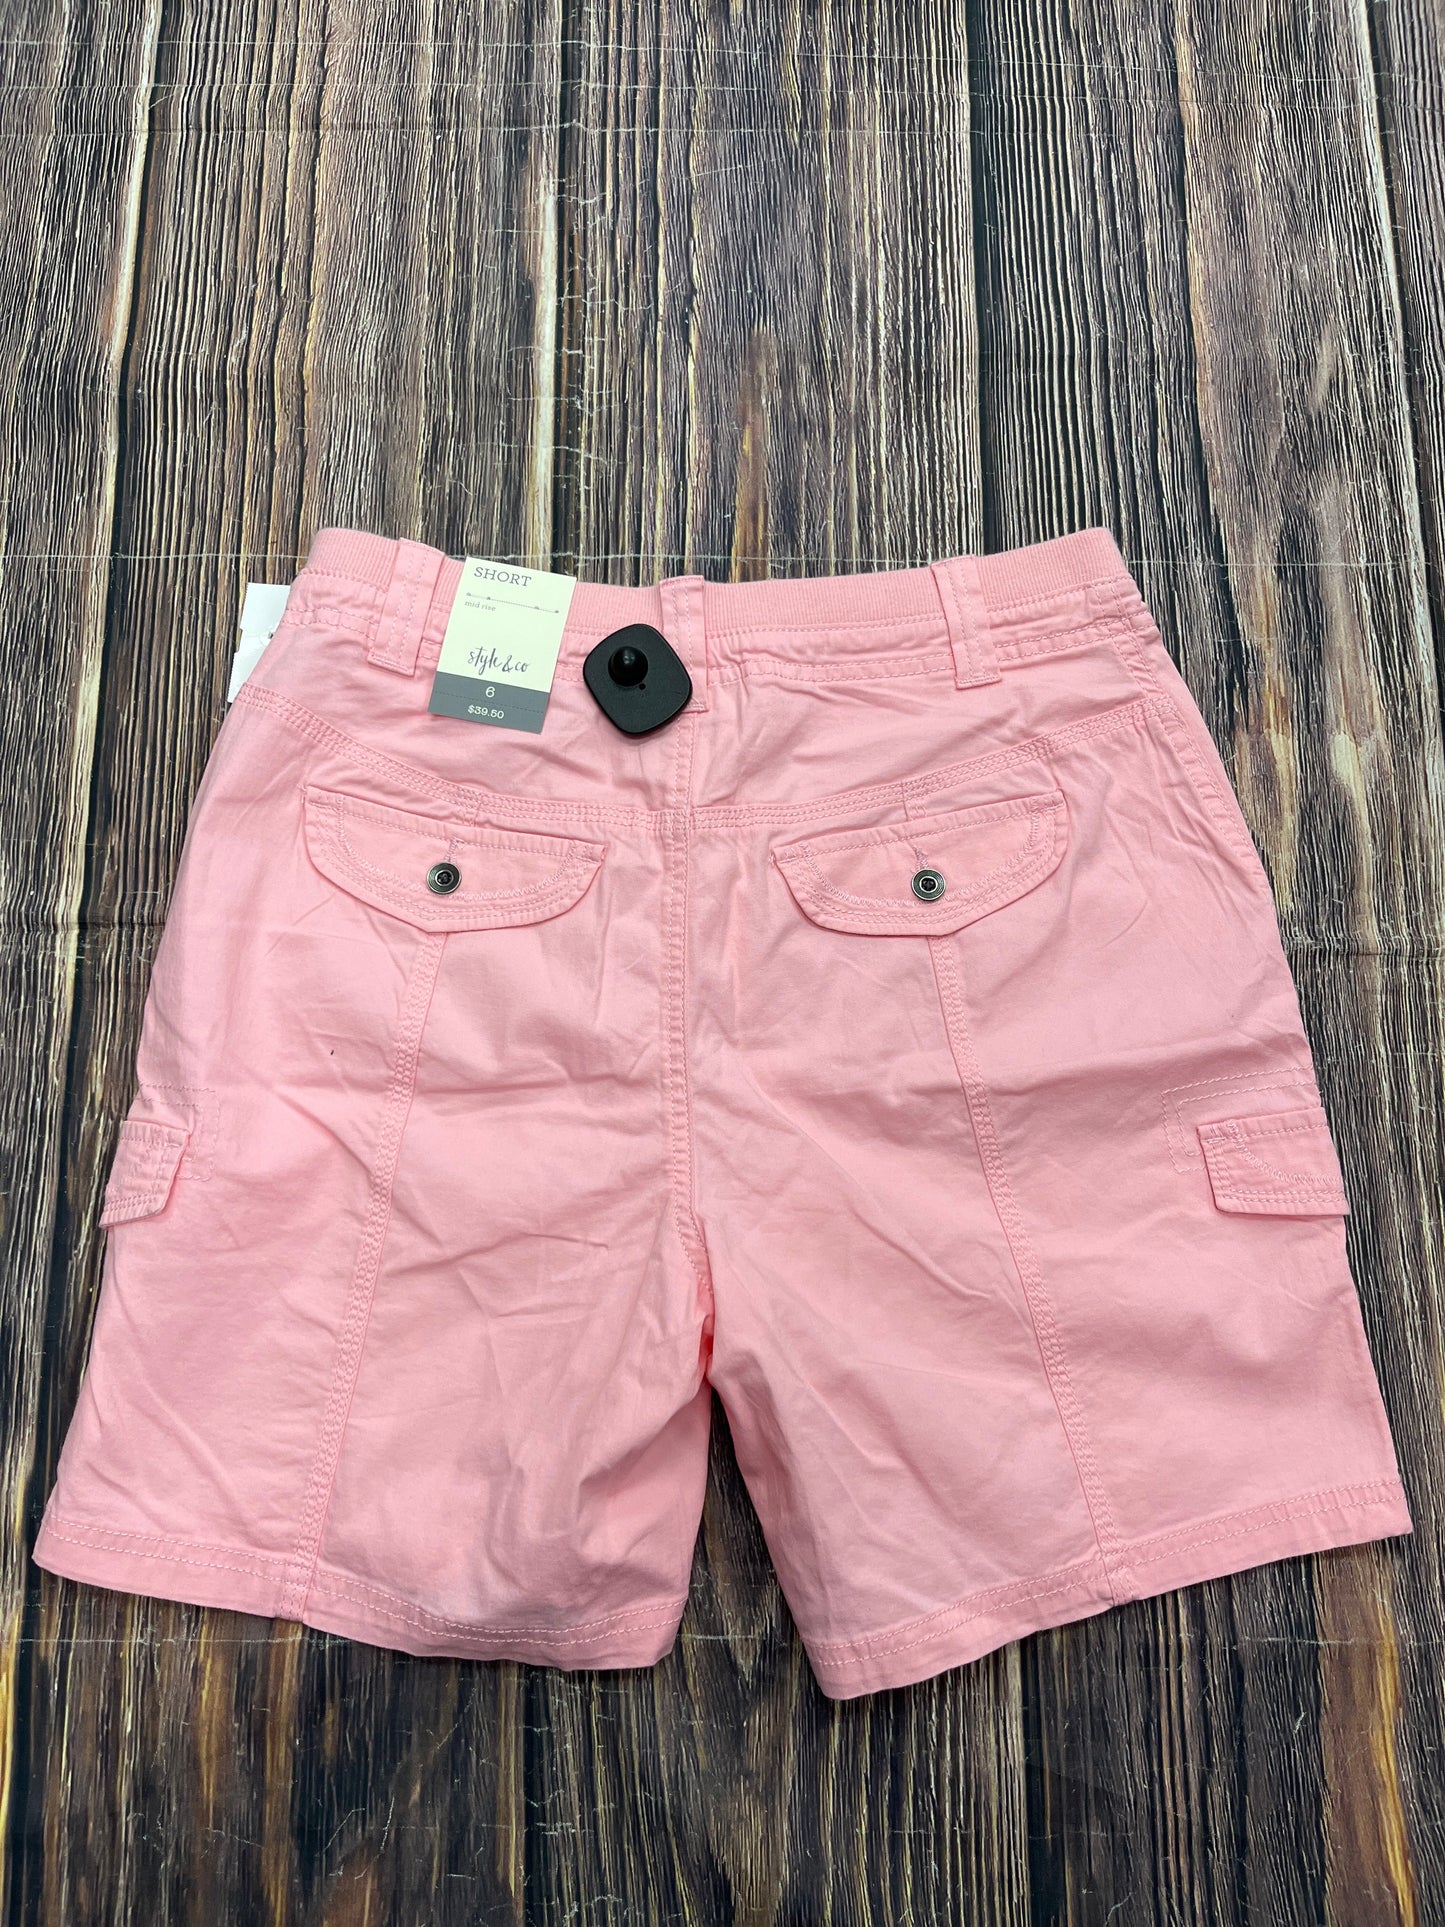 Pink Shorts Style And Company, Size 6